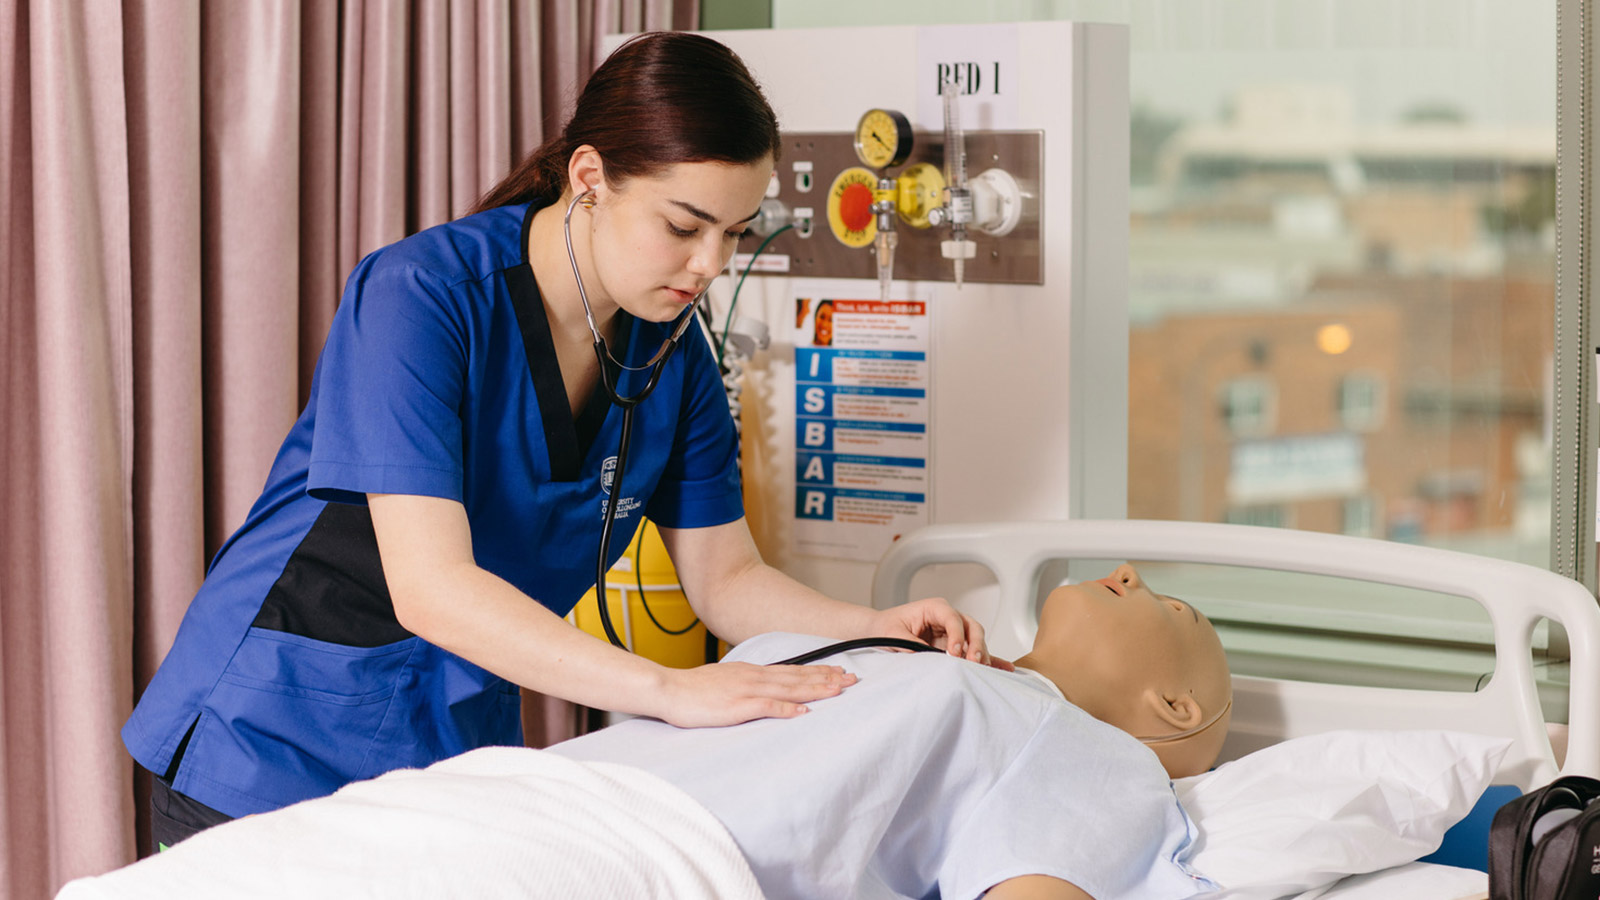 Angelique has pale skin and dark brown hair. She is in a nusing lab at UOW, wearing a dark blue uniform. She is using a stethescope on a dummy patient.